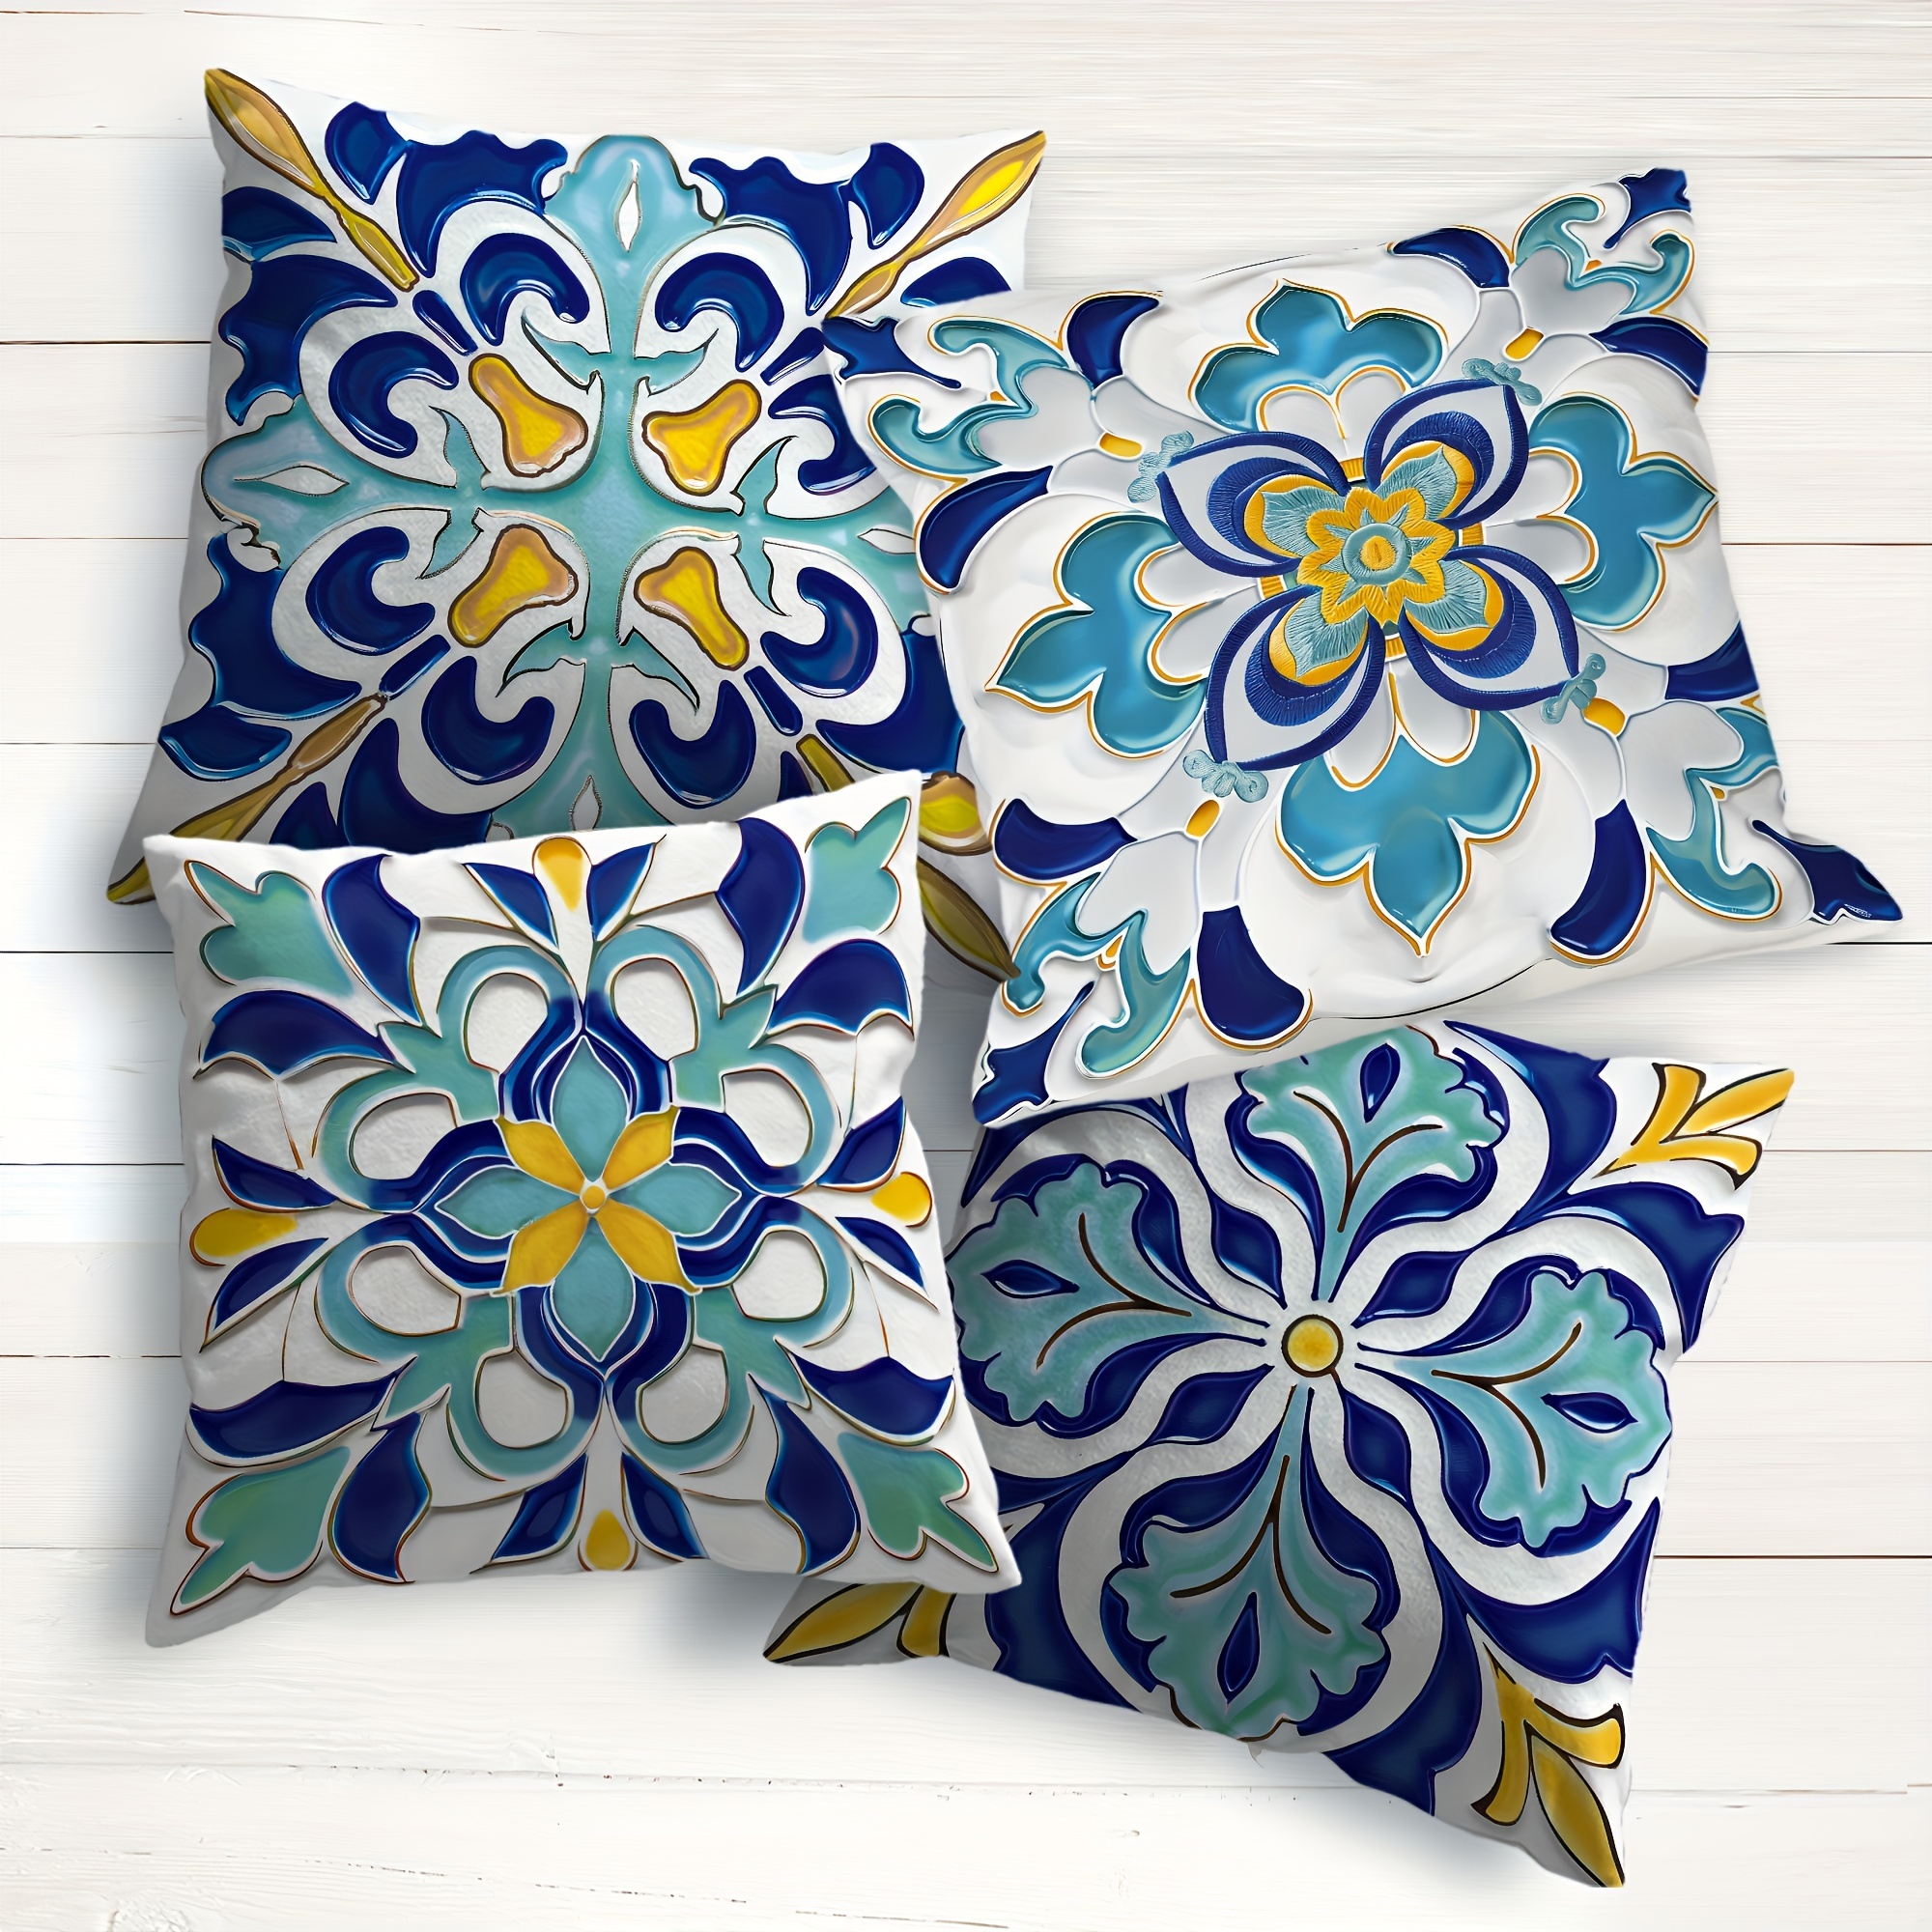 

Set Of 4 Boho Floral Waterproof Throw Pillow Covers, Teal & White - Decorative Outdoor Cushion Cases For Patio Furniture, Sofa, And Garden Decor, Zip Closure, Hand Wash Only